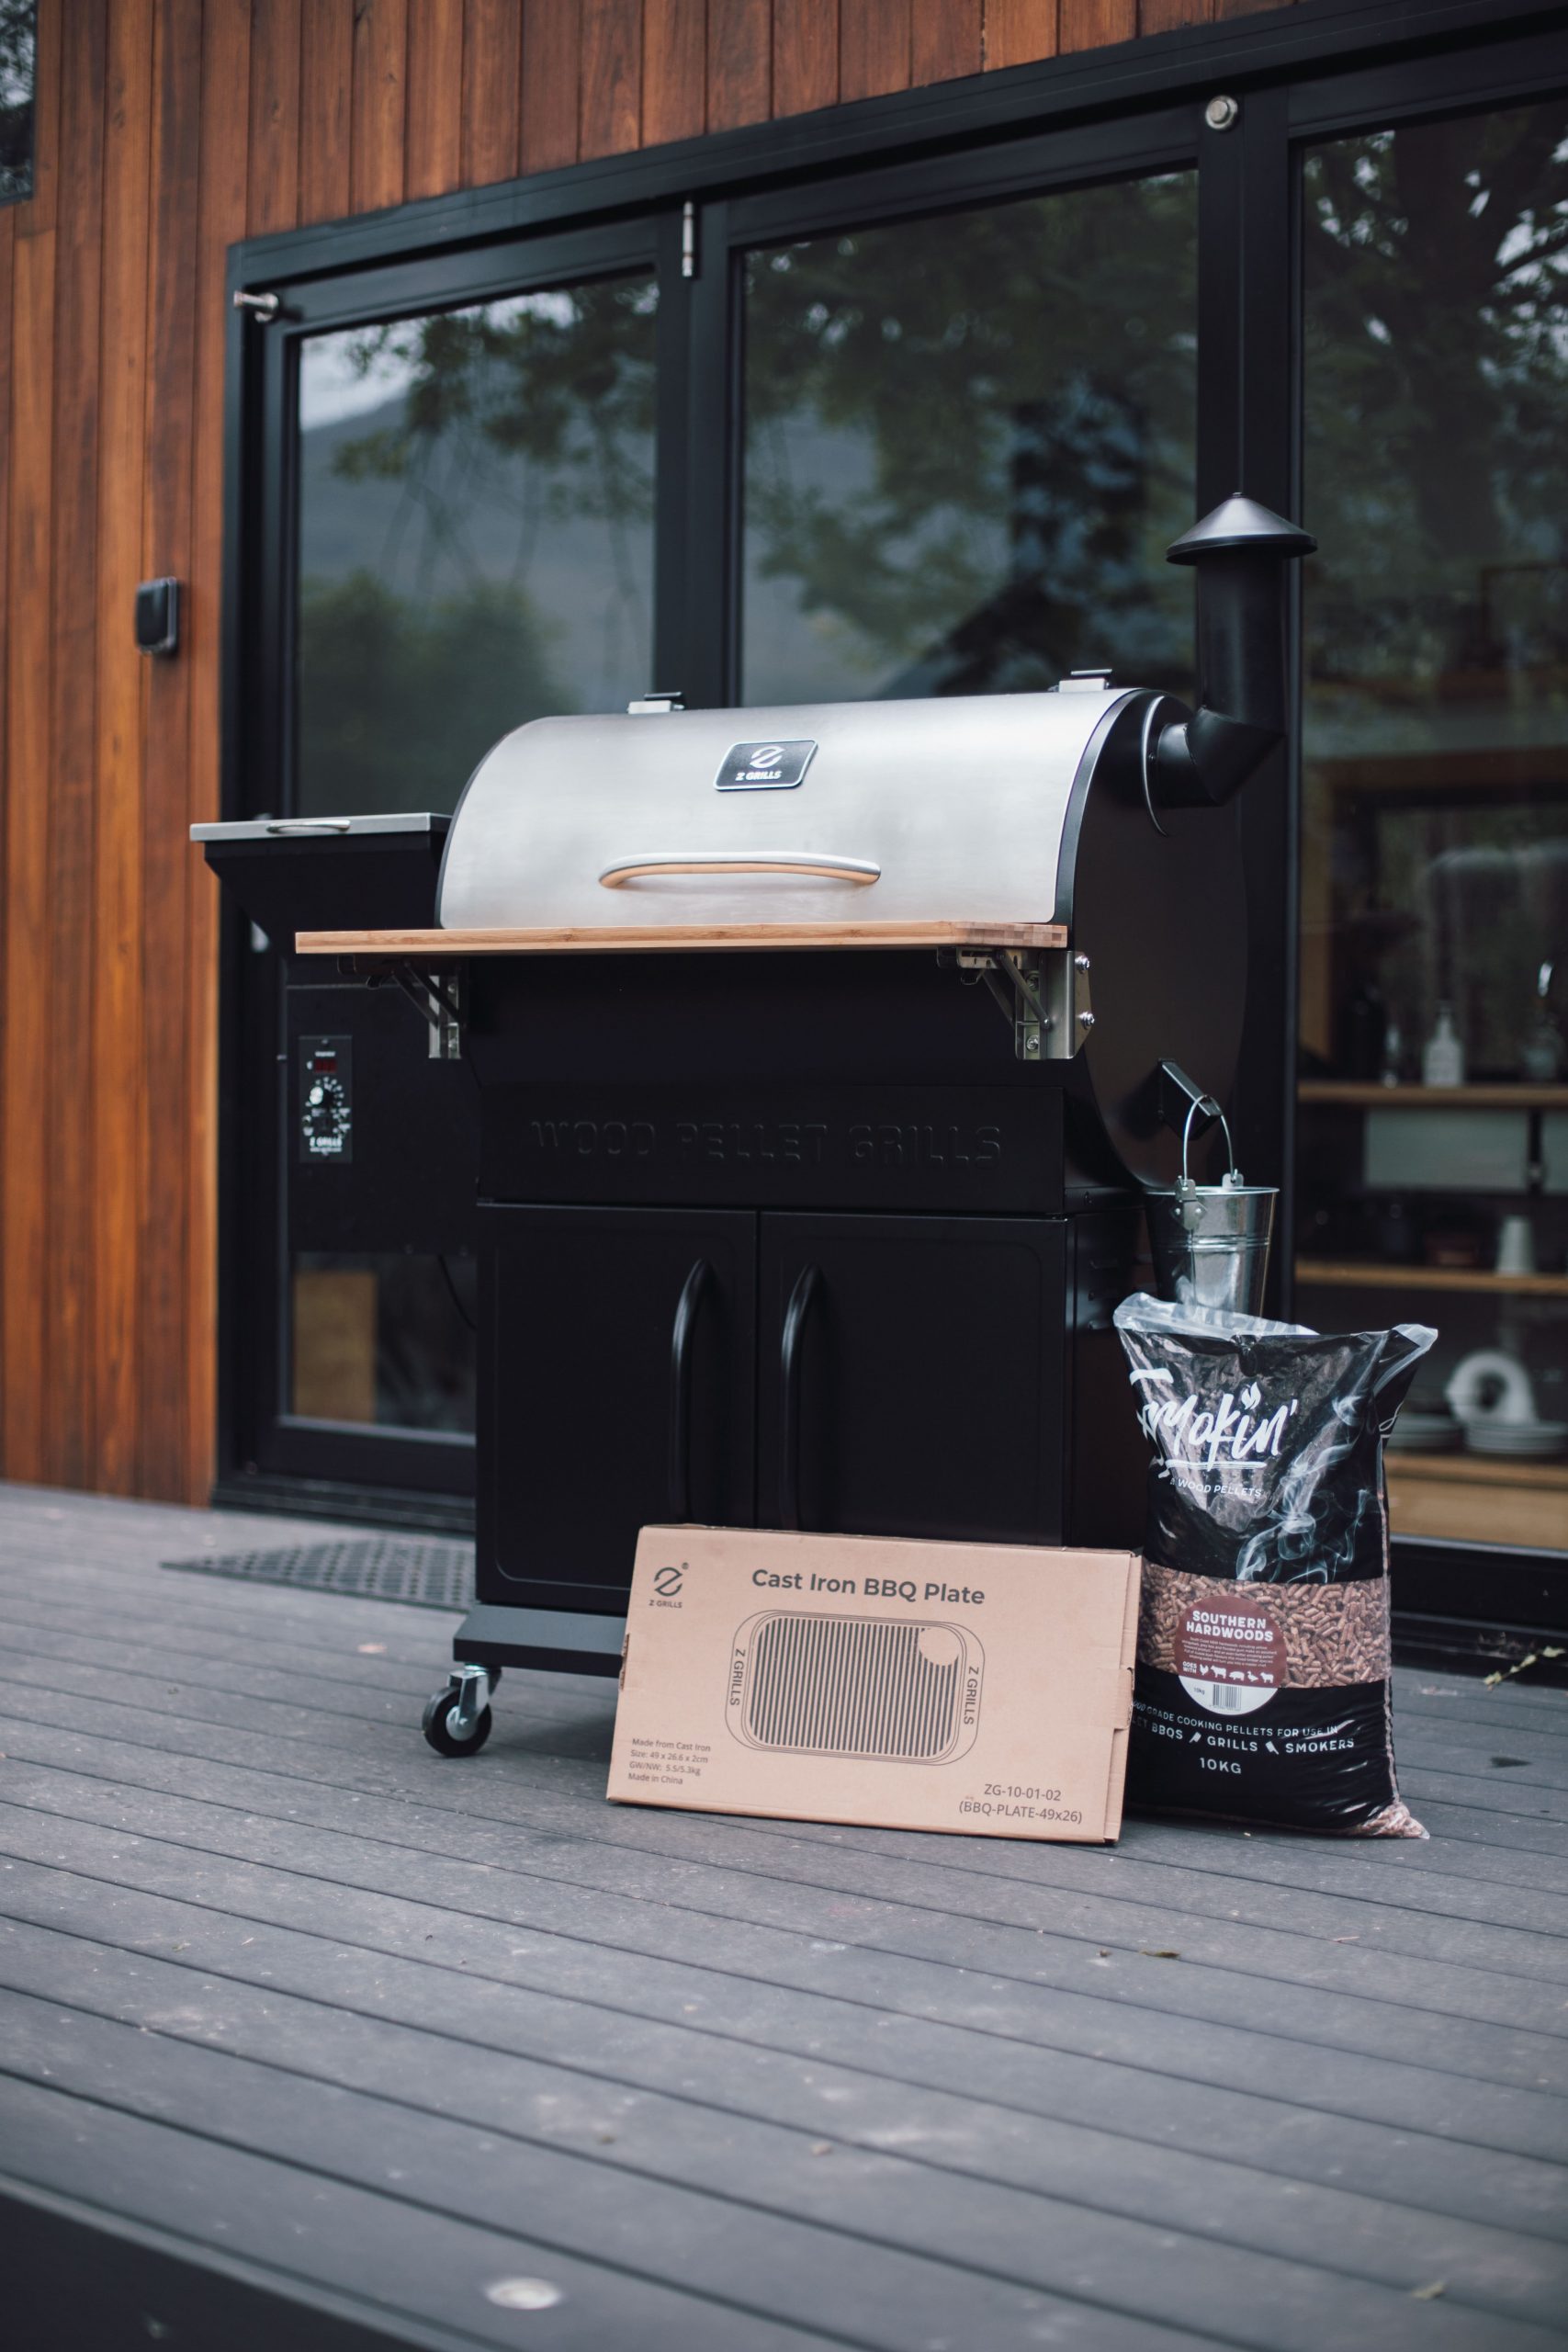 How To Use A Traeger Wood Pellet Grill